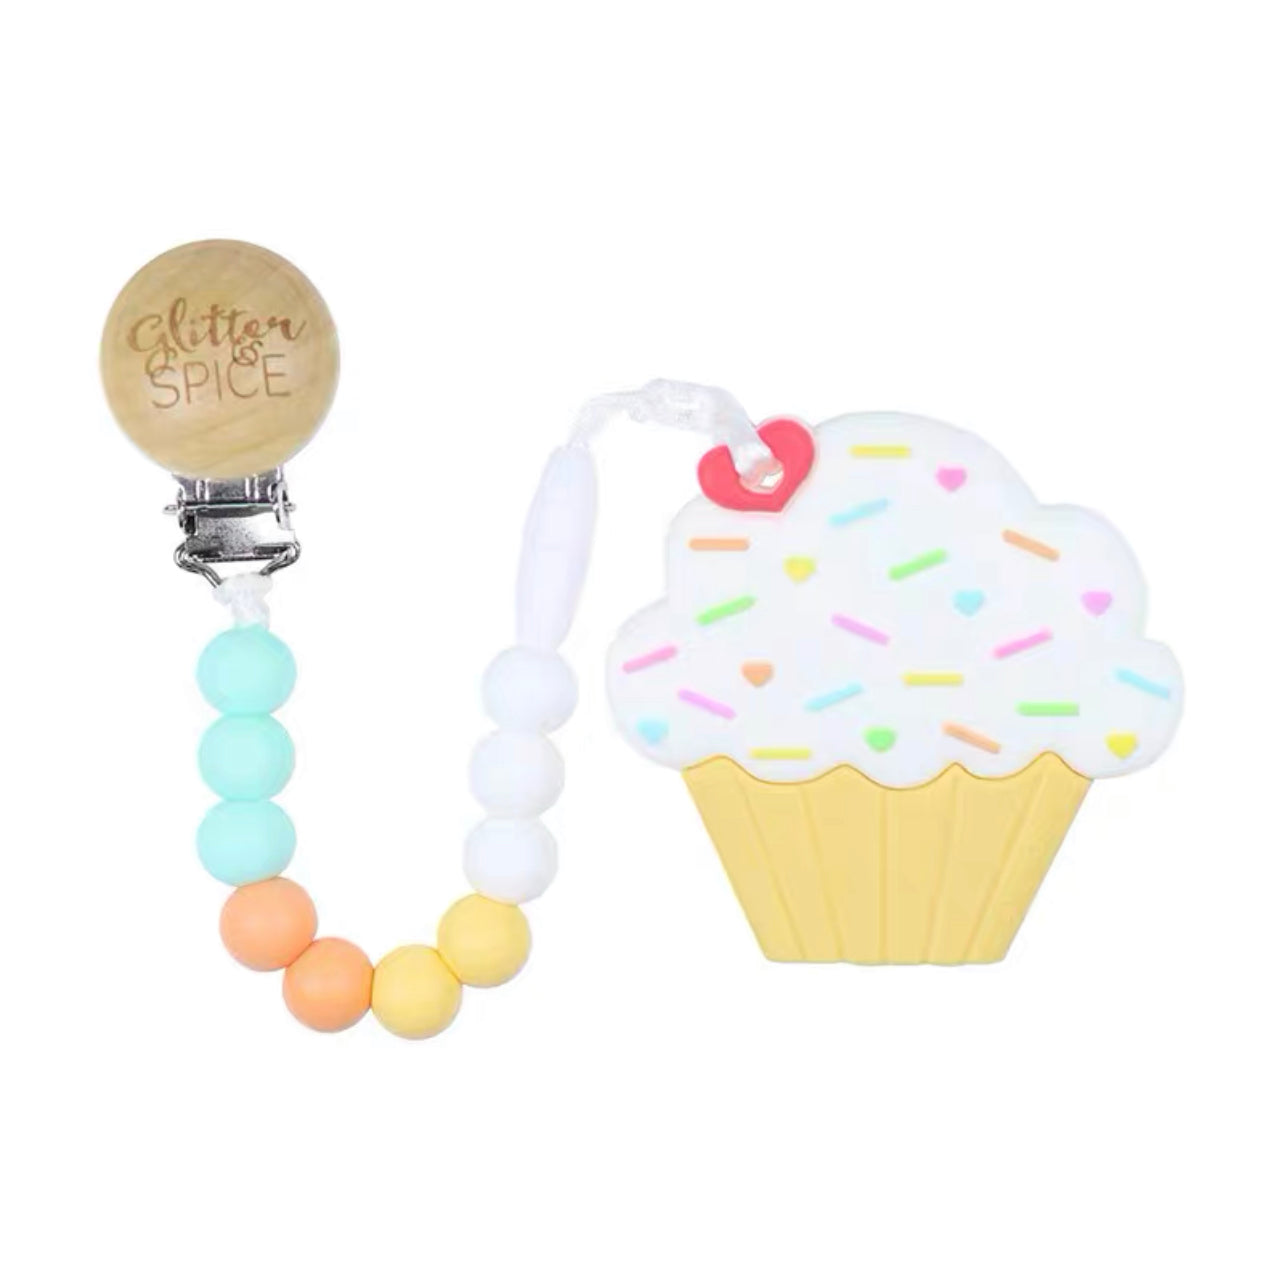 Glitter & Spice Silicone Teether 矽膠牙膠 (Cake)